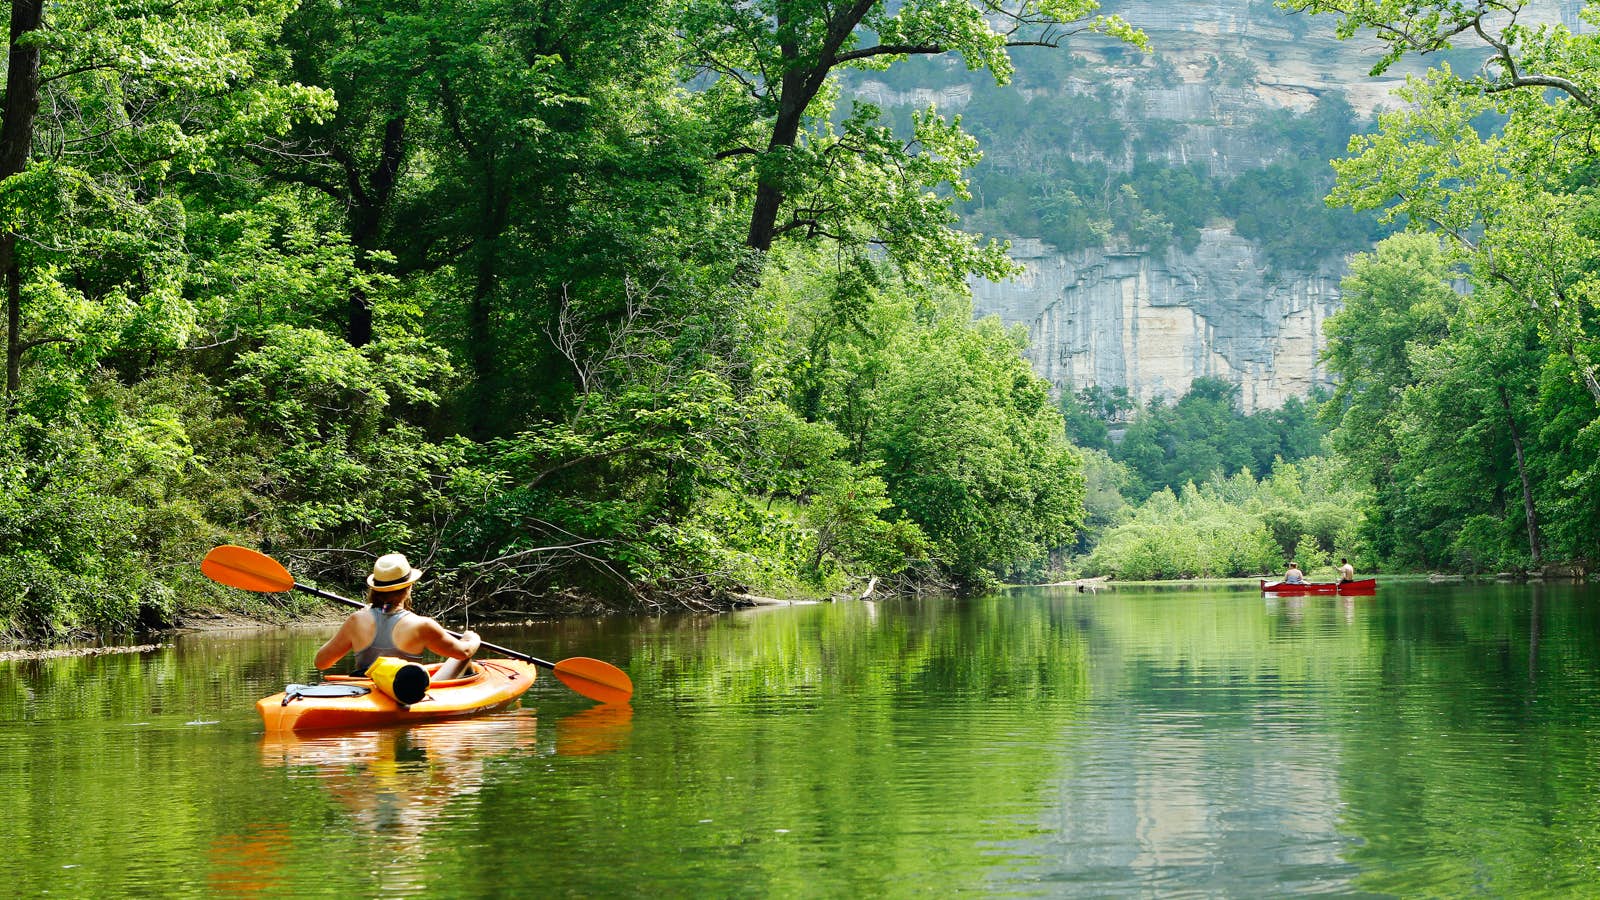 Kayakers on a river surrounded by green trees; summer escapes in the Southern US